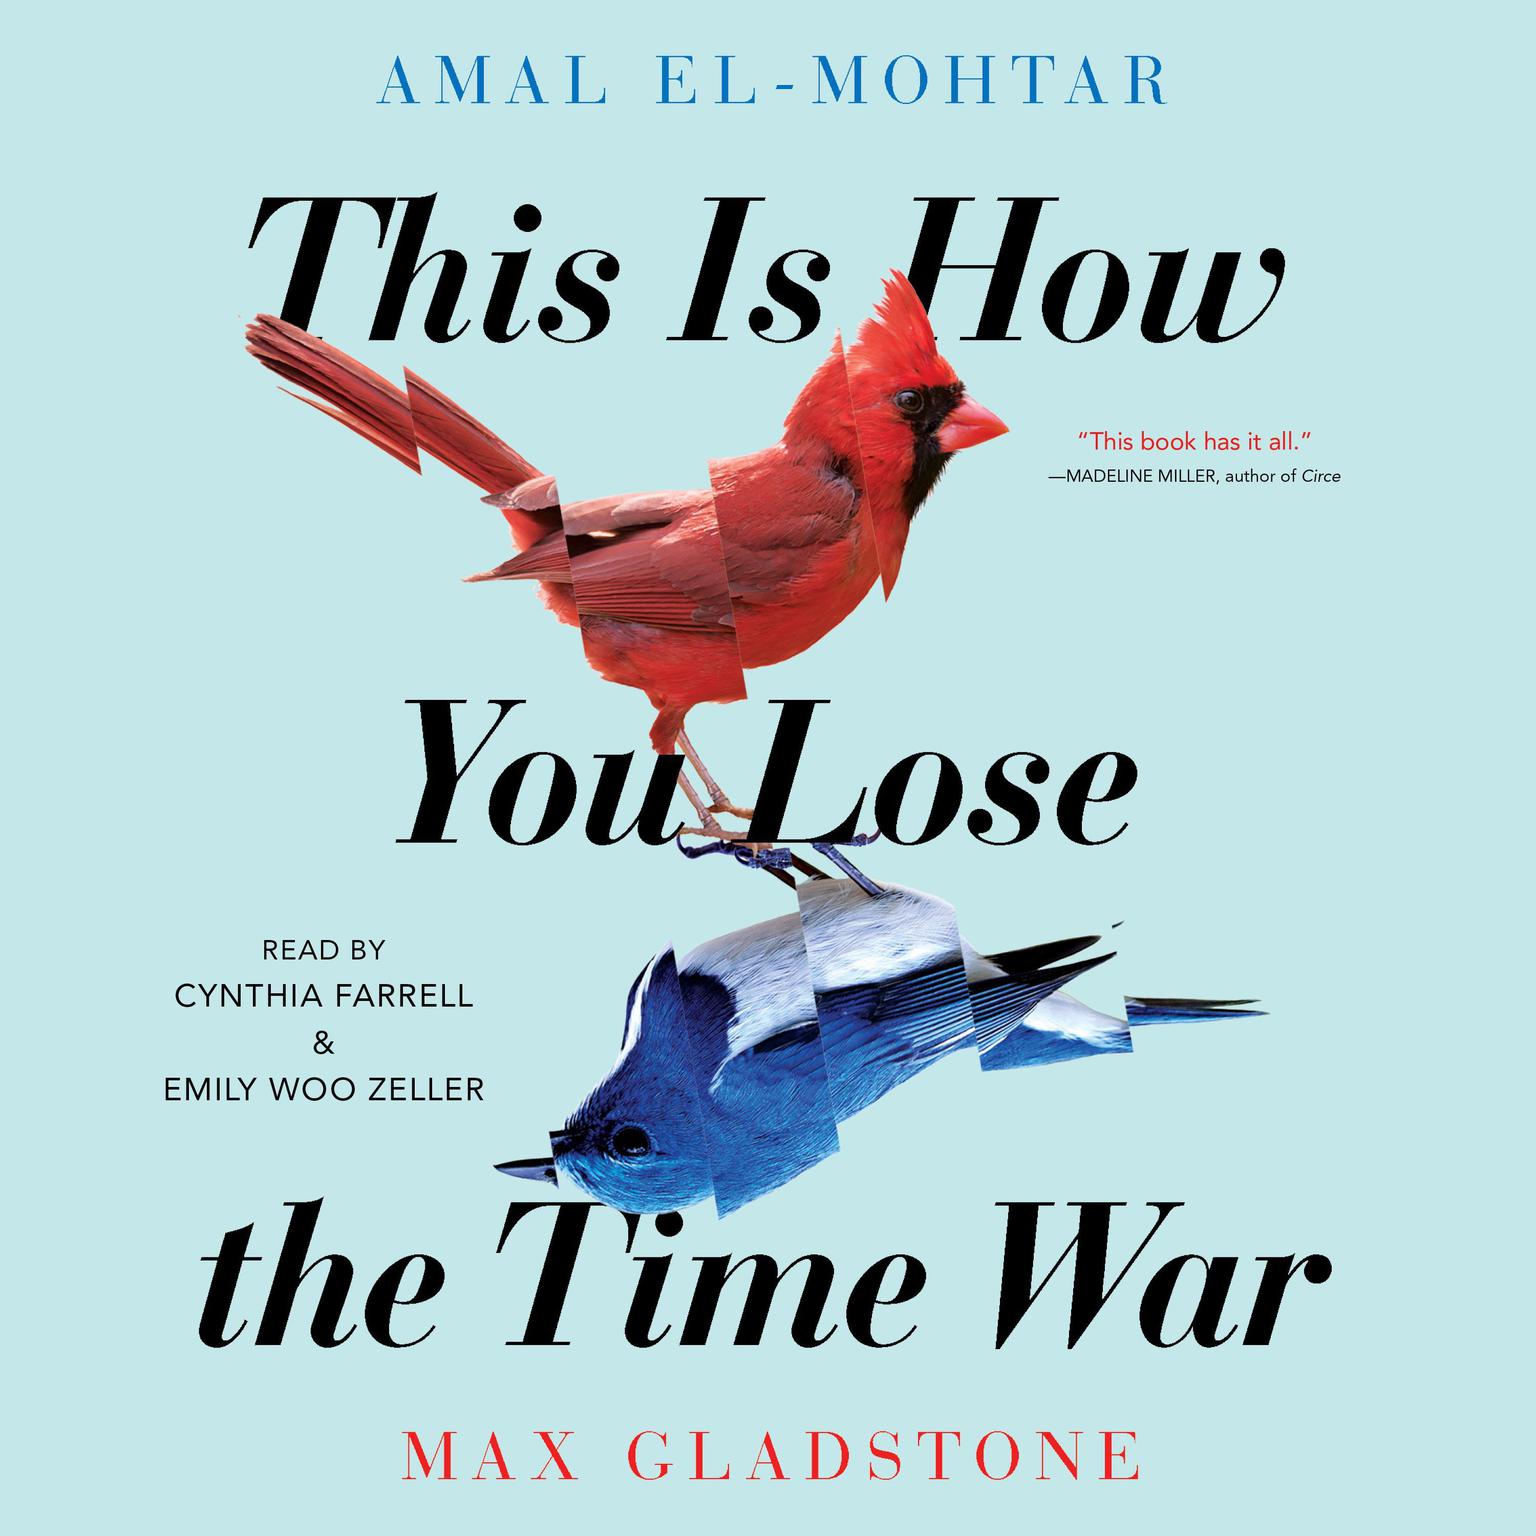 Max Gladstone, Amal El-Mohtar: This Is How You Lose the Time War (Paperback, 2020, Gallery / Saga Press)